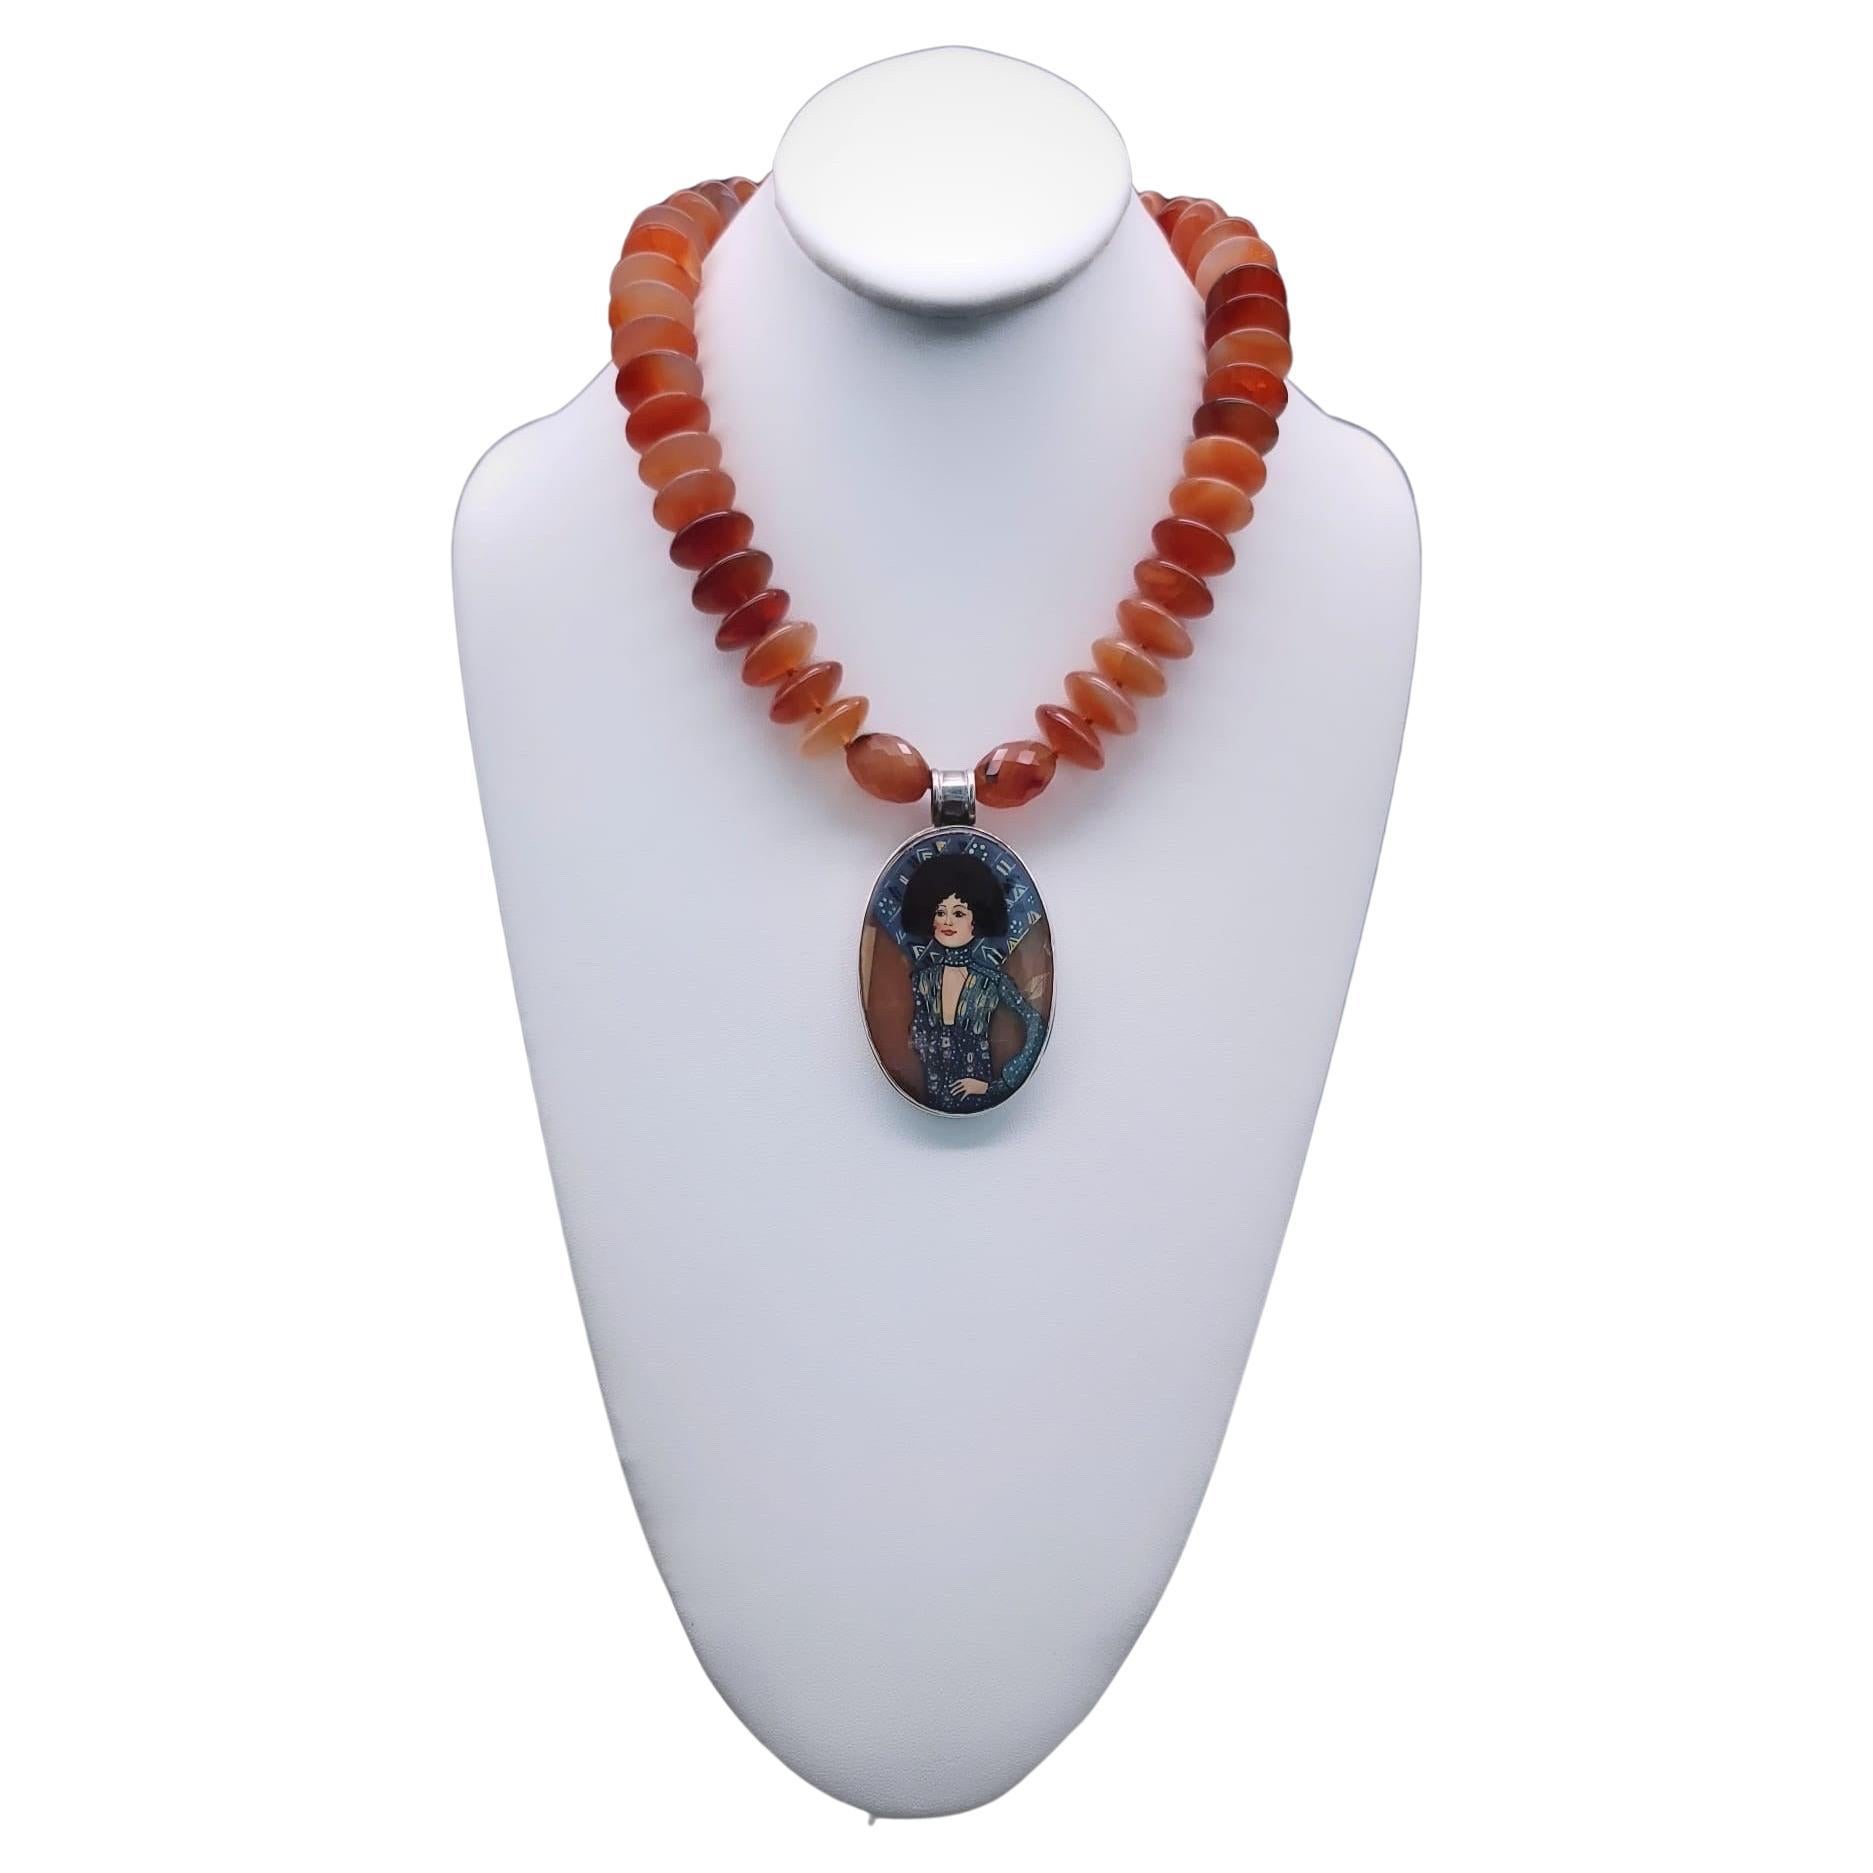 One-of-a-Kind

Prepare to be enchanted by our one-of-a-kind  Carnelian necklace with Gustav Klimt's 